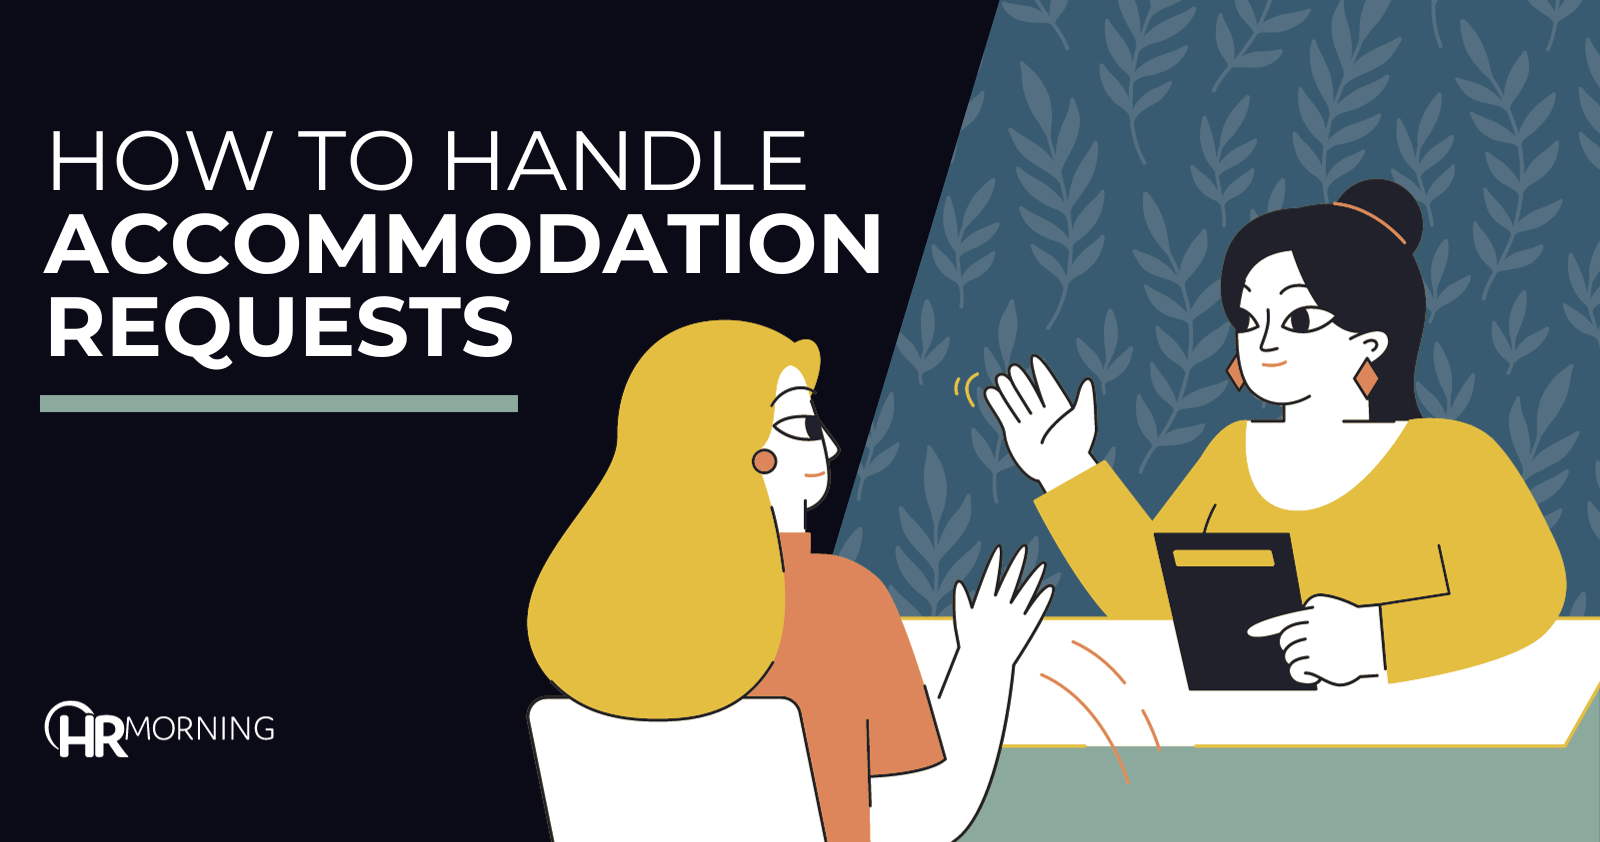 How to handle accommodation requests